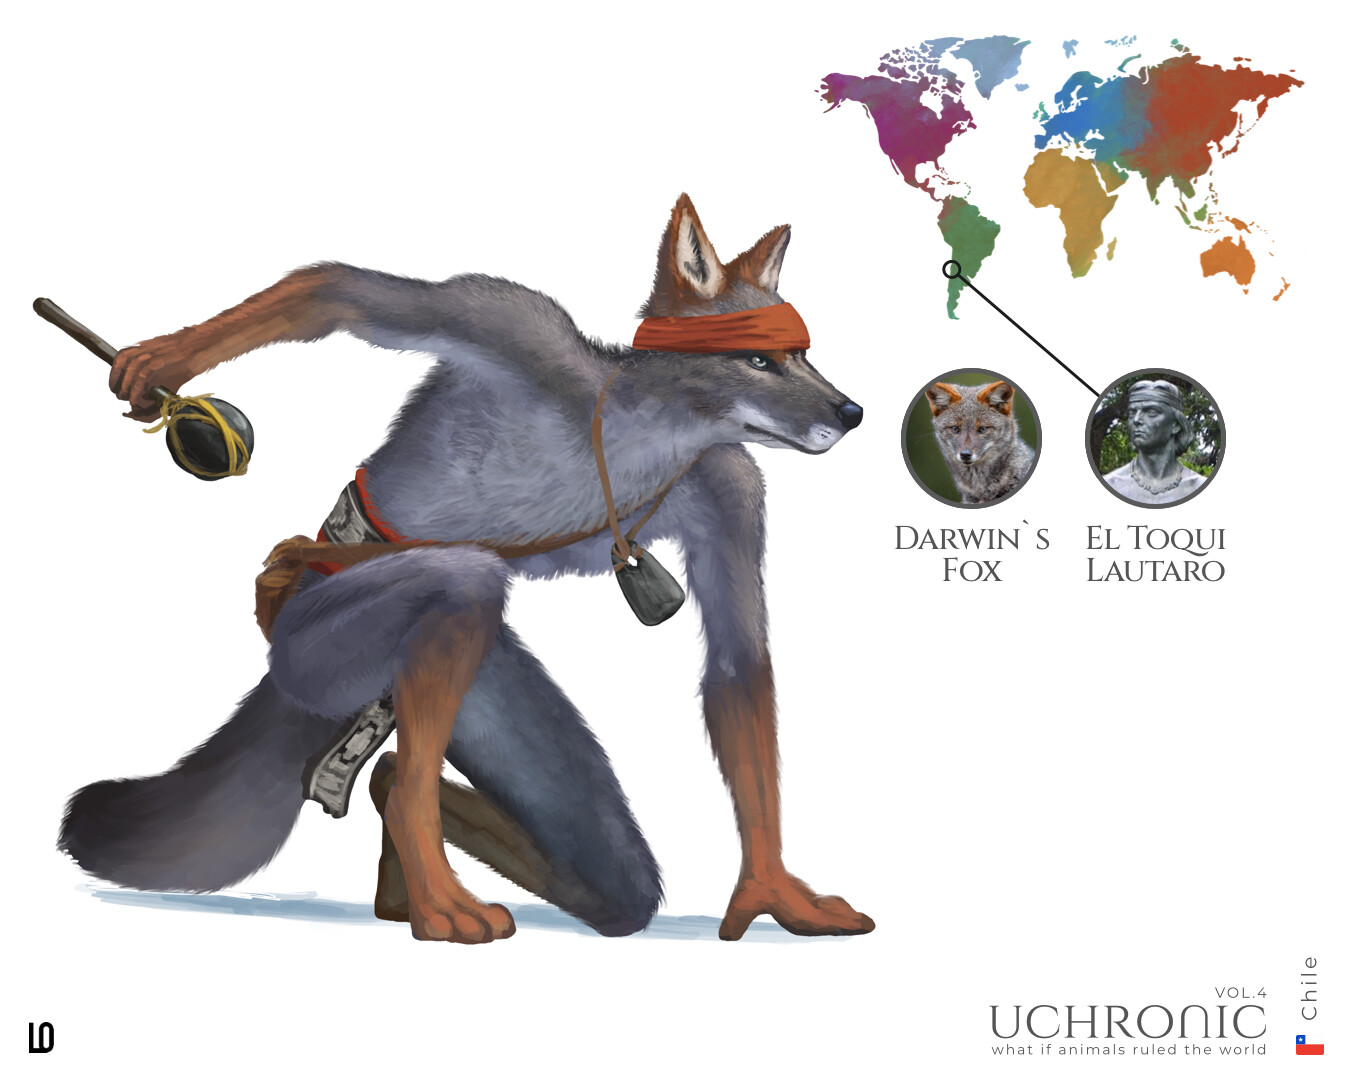 El Toqui Lautaro, a brave warrior and leader of the Mapuche resistance against the Spanish conquest in Chile, as the unique Darwin’s Fox, a beautiful and sadly endangered animal.